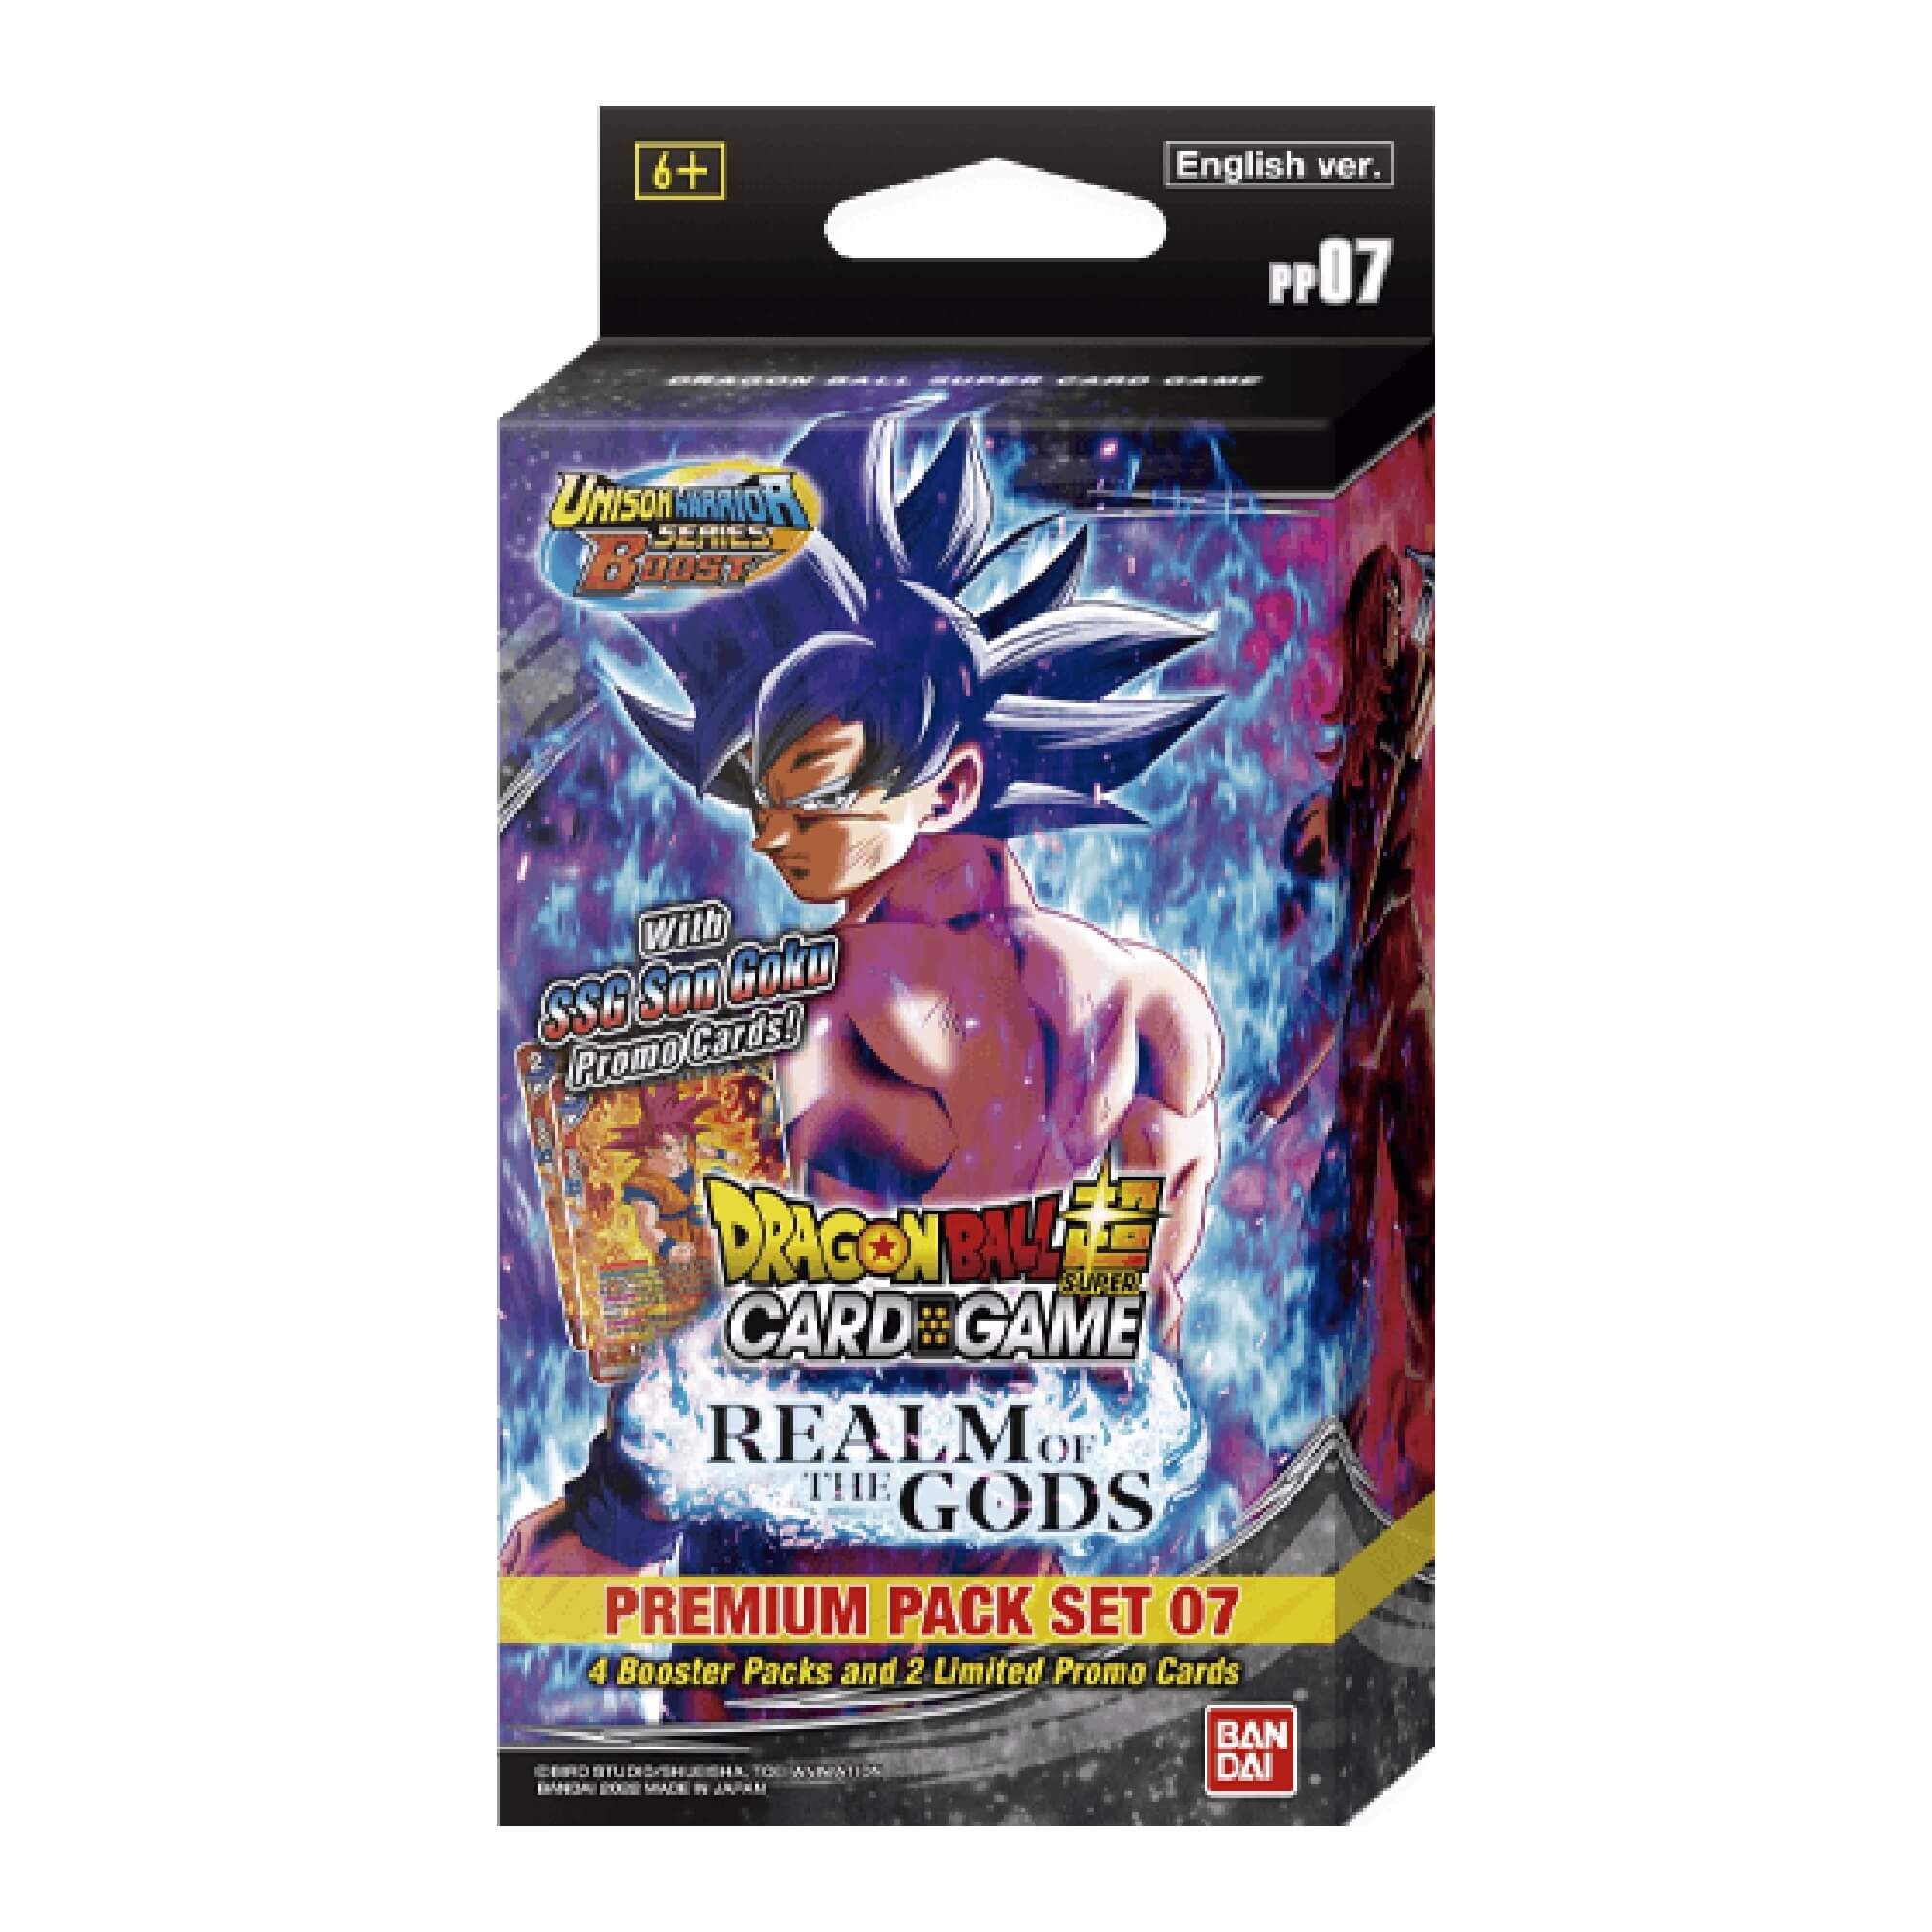 Dragon Ball Super Card Game: Realm of the Gods (PP07) - Premium Pack Set (ENG)